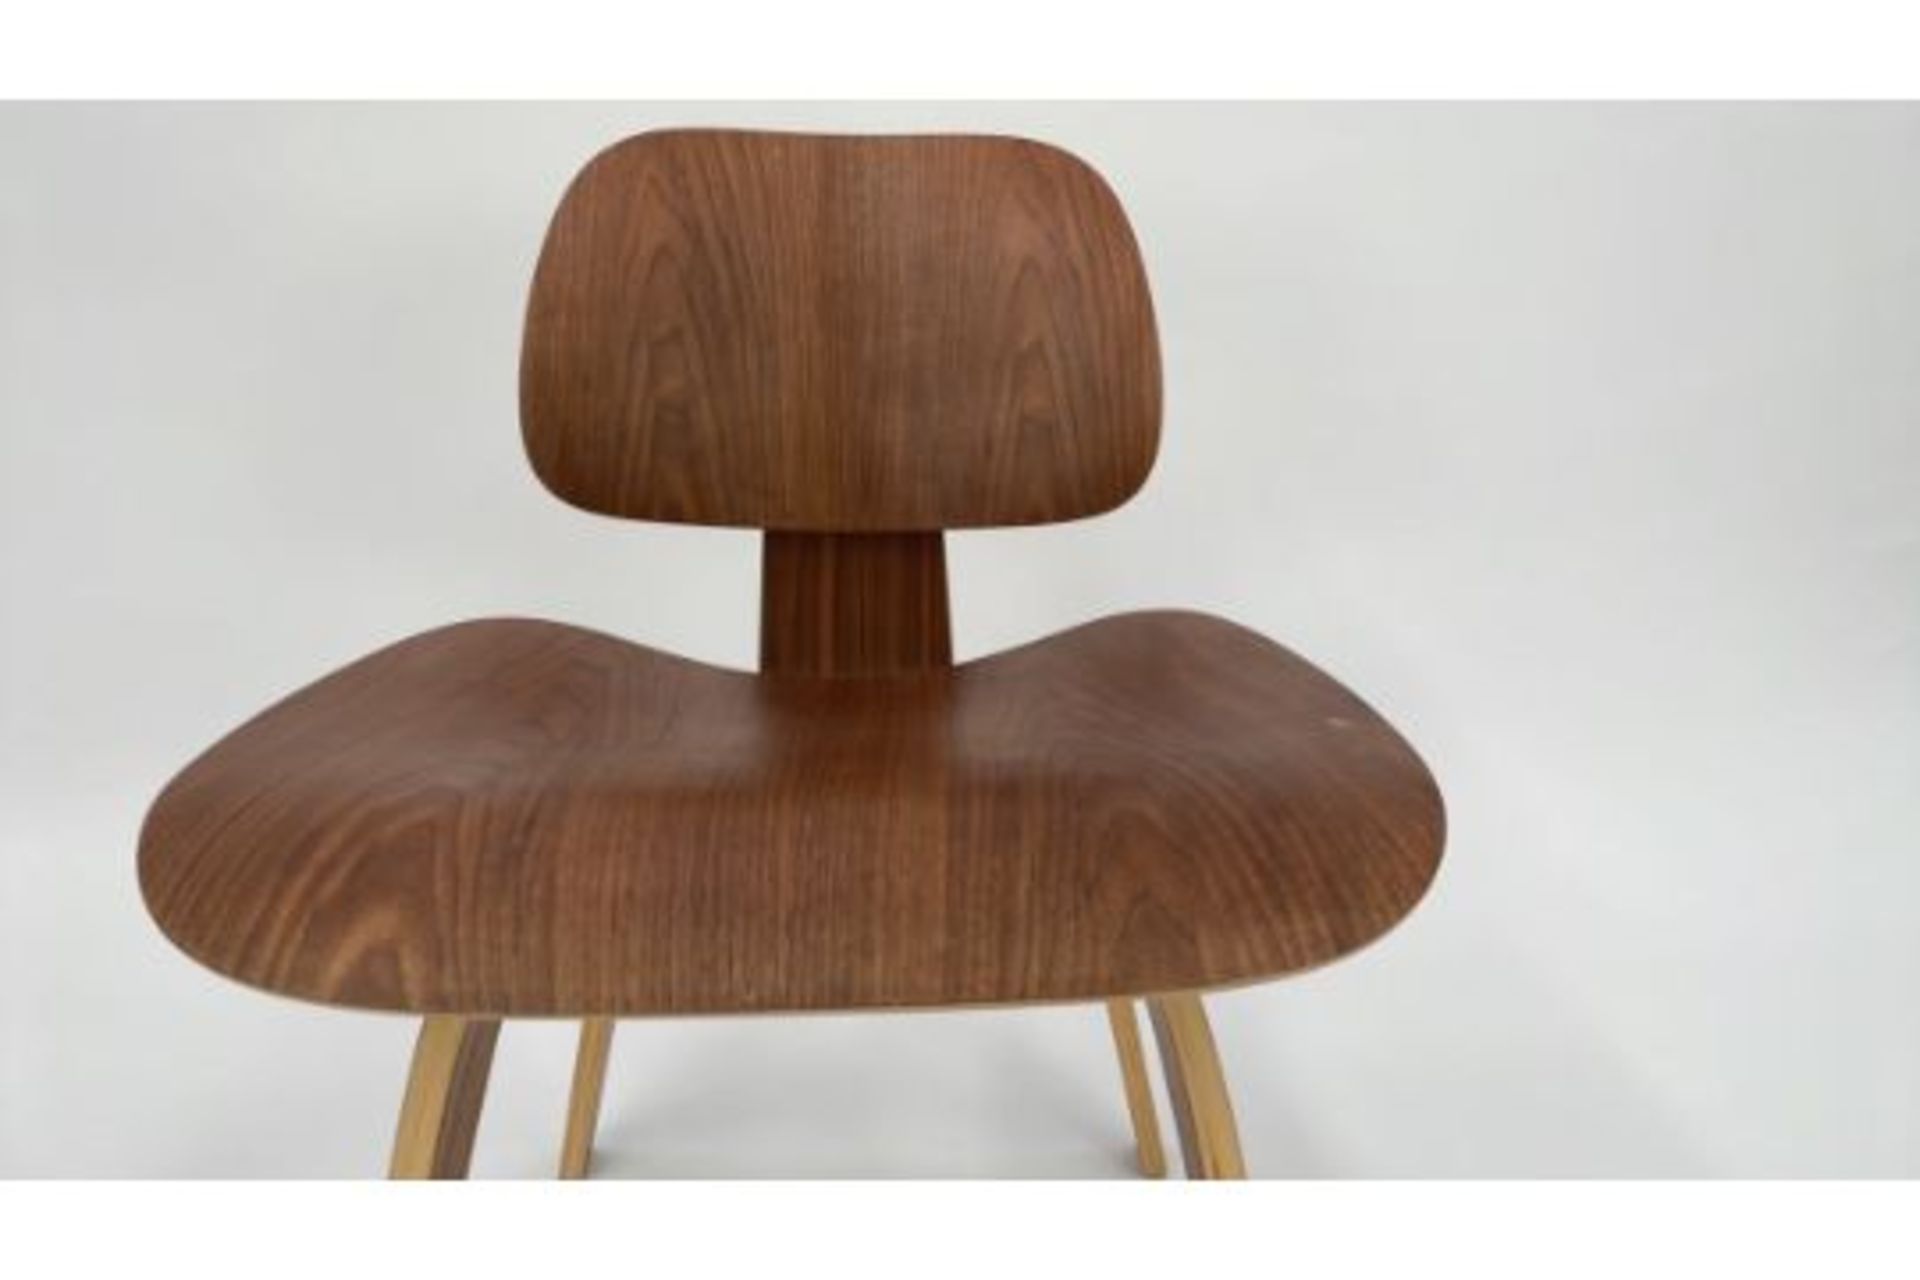 Replica Eames LCW Plywood Lounge Chair x1 - Image 3 of 3